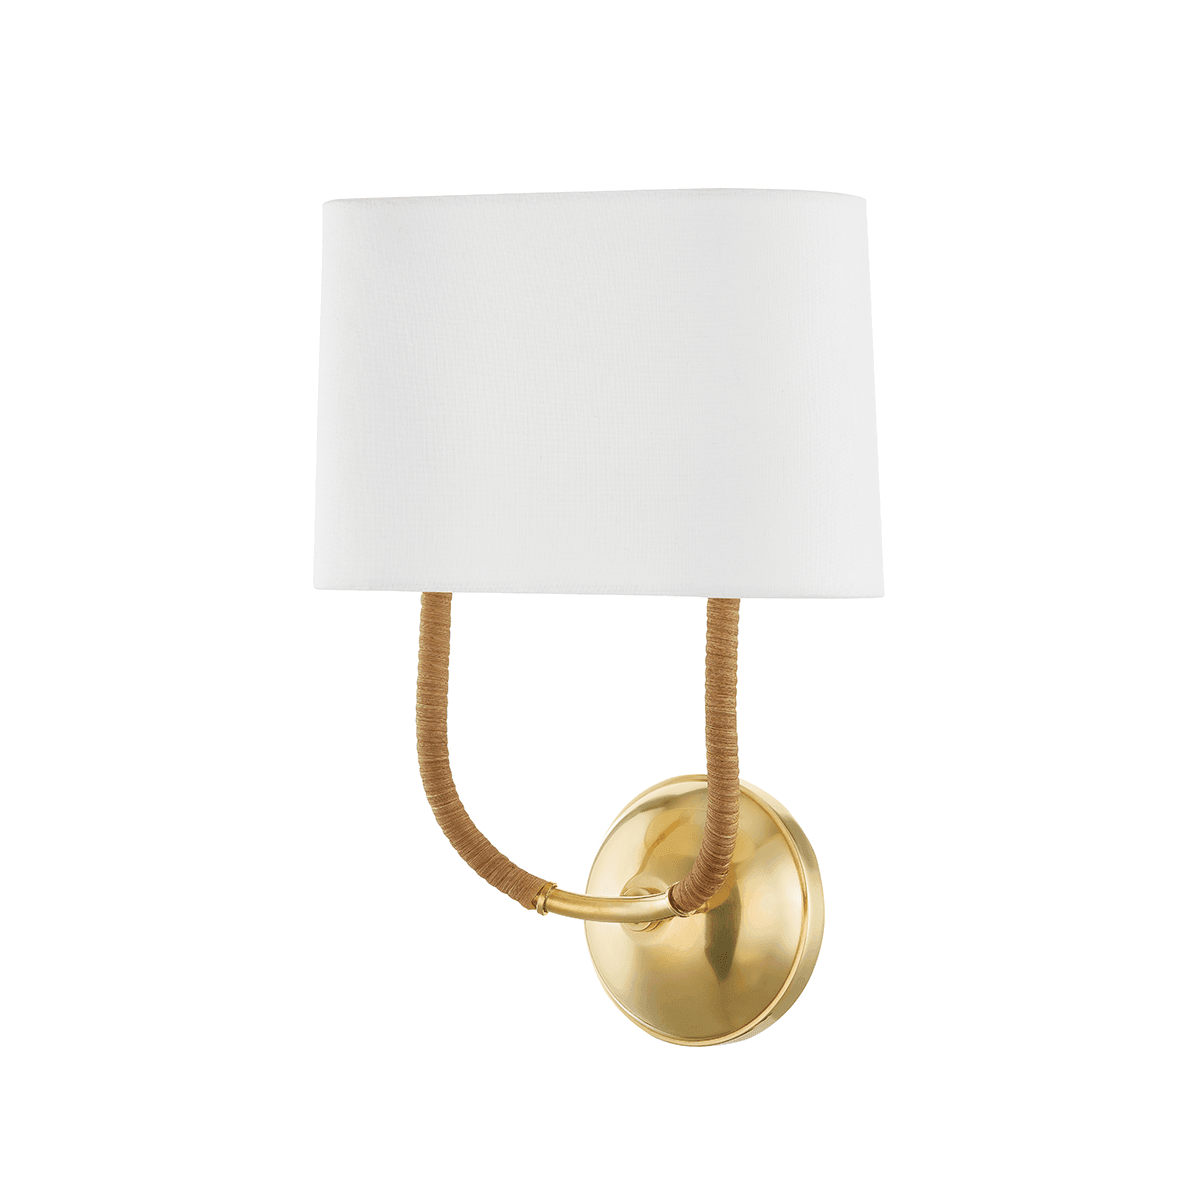 Hudson Valley Lighting - Webson Wall Sconce - 3502-AGB | Montreal Lighting & Hardware